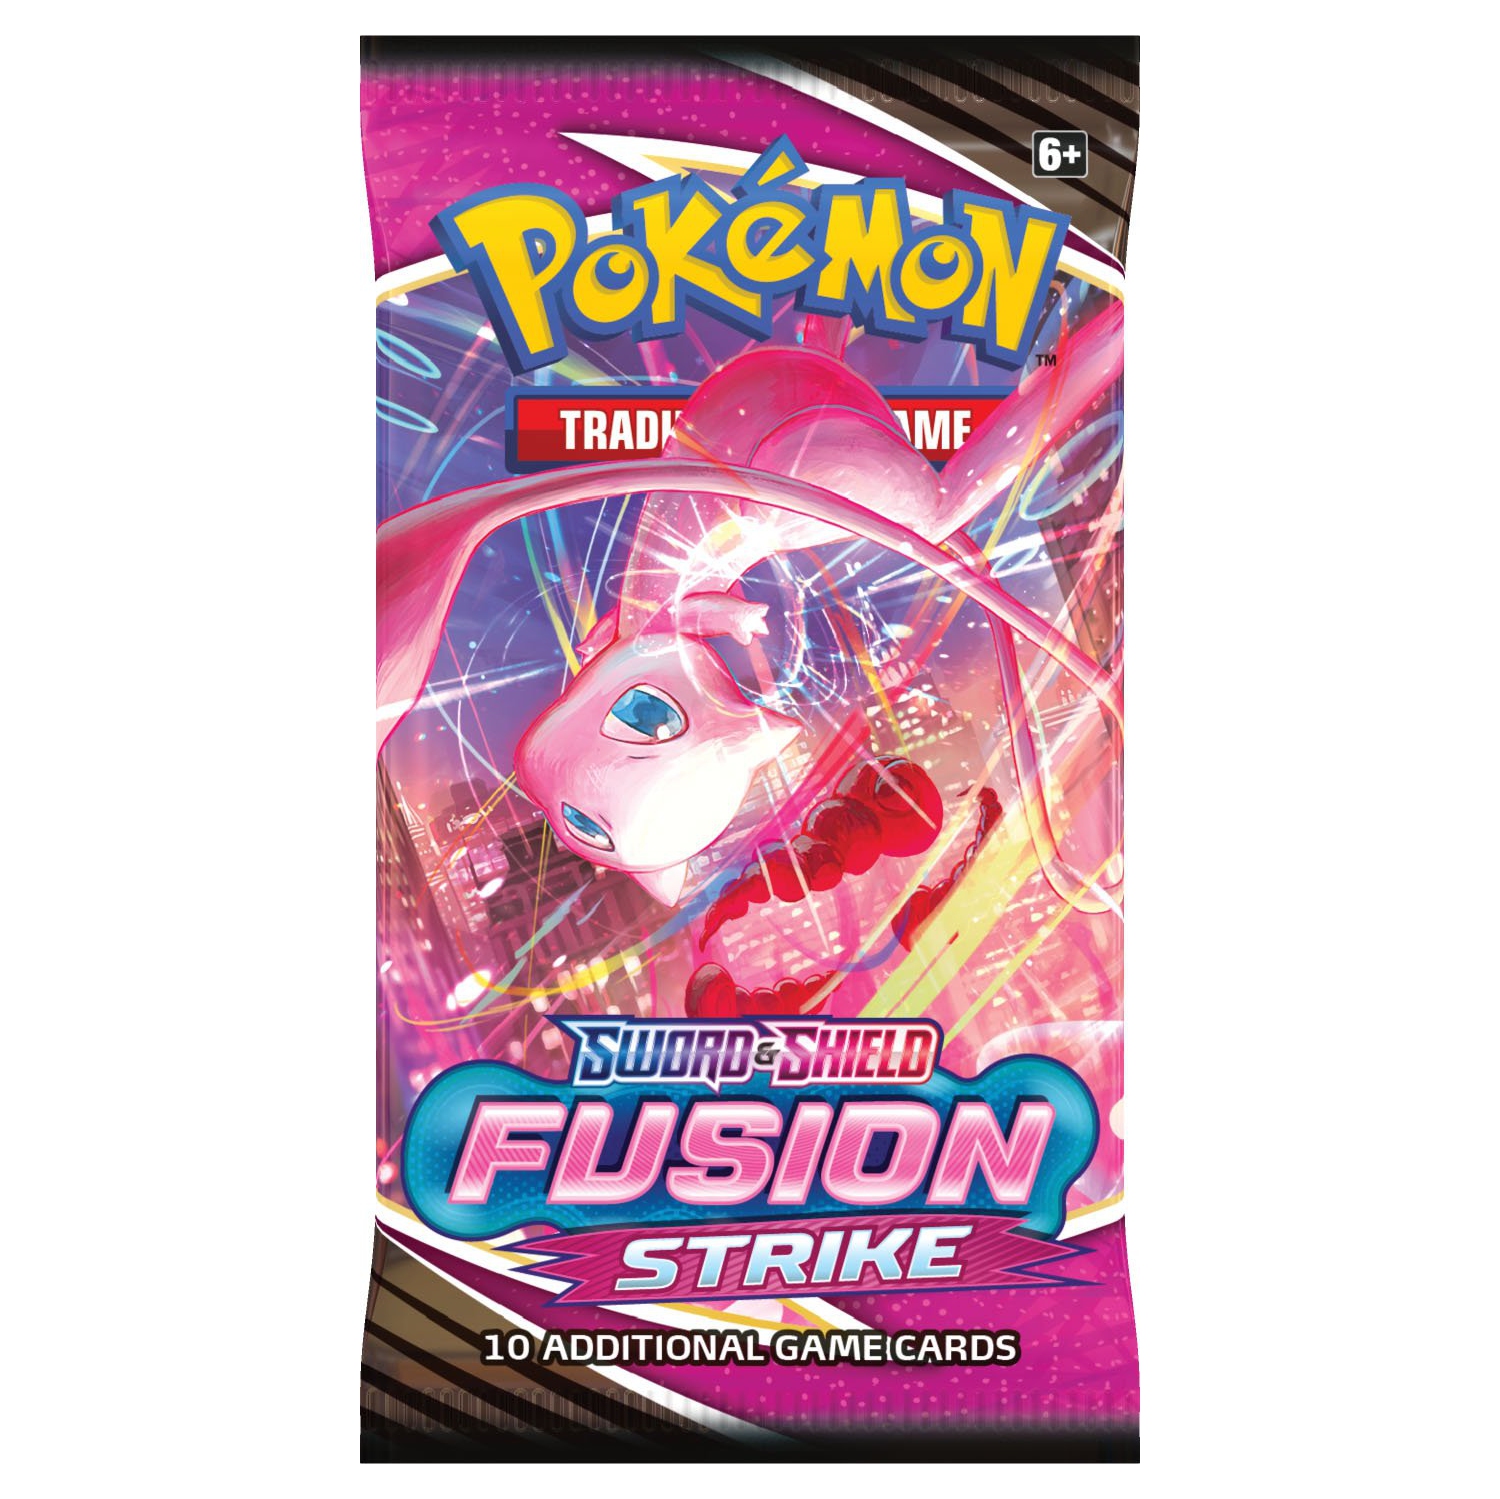 Pokemon USA Pokemon Trading Card Game: Sword & Shield (SWSH8) Fusion Strike Booster Pack 10 cards per pack